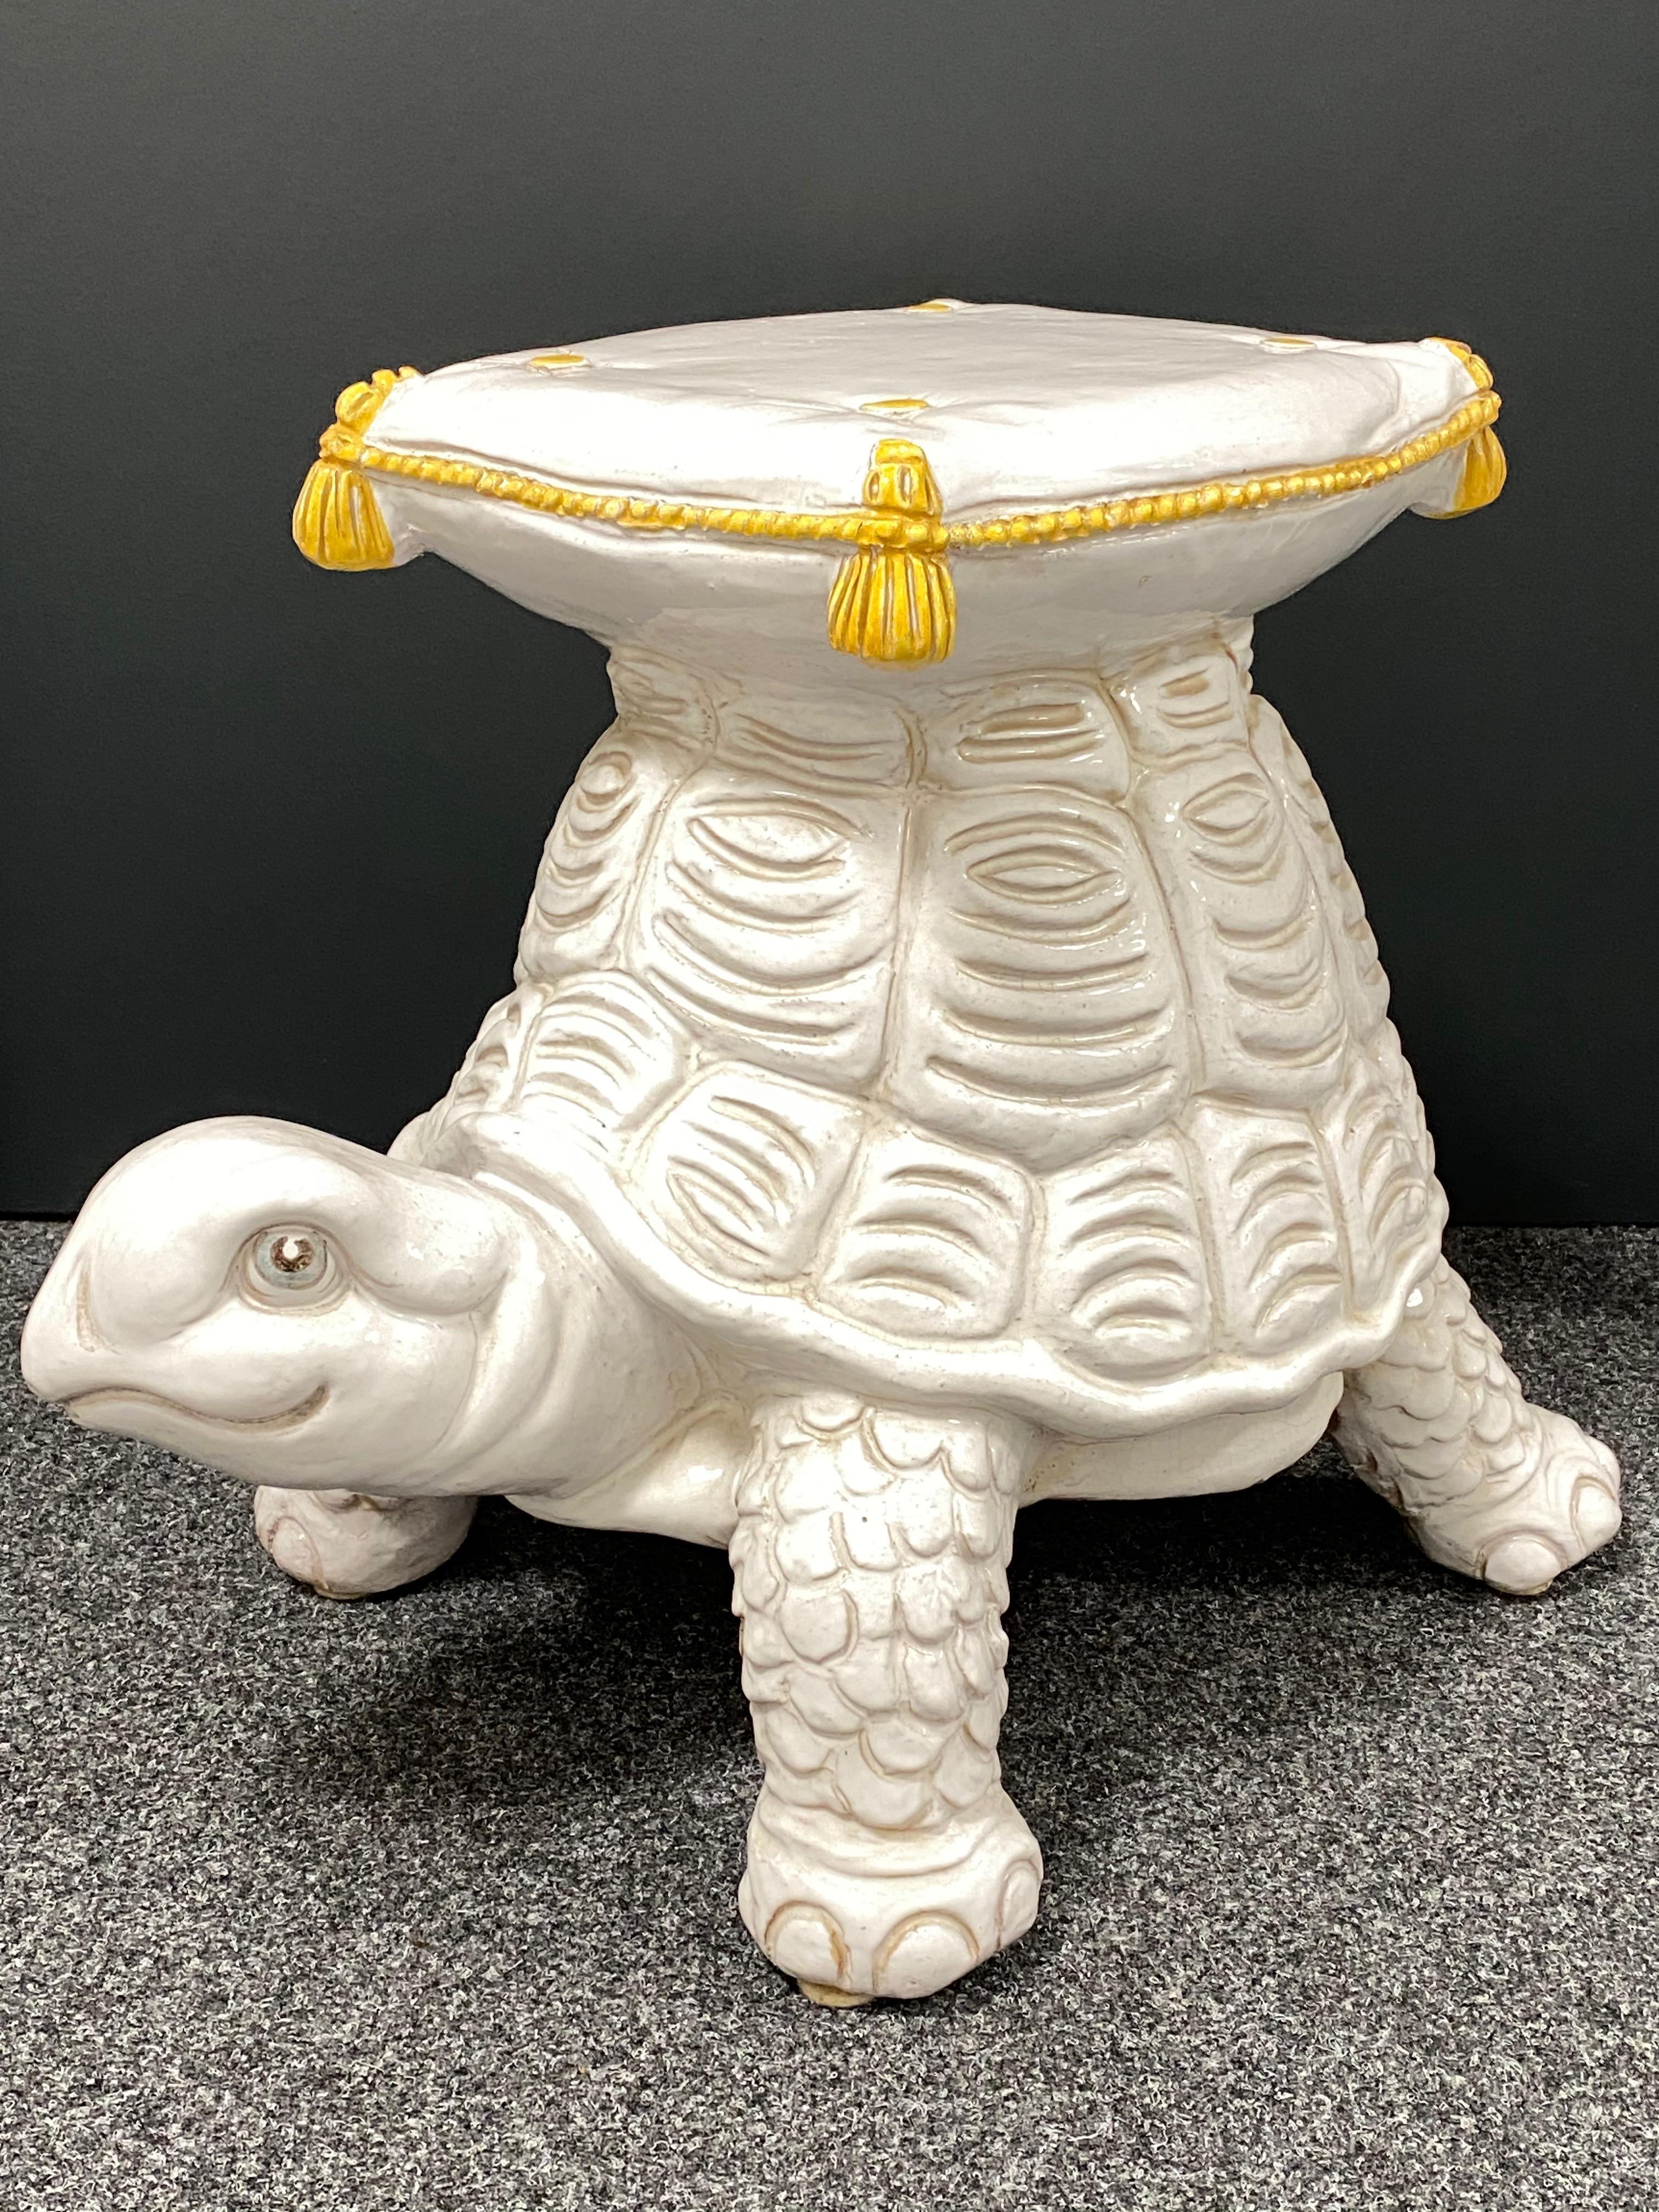 Mid-20th century glazed Italian terracotta turtle garden stool, flower pot seat, patio decoration or side table. Nice addition to your home, patio or garden. Unusual form for a vintage garden seat in the shape of a turtle with tufted pillow top, all